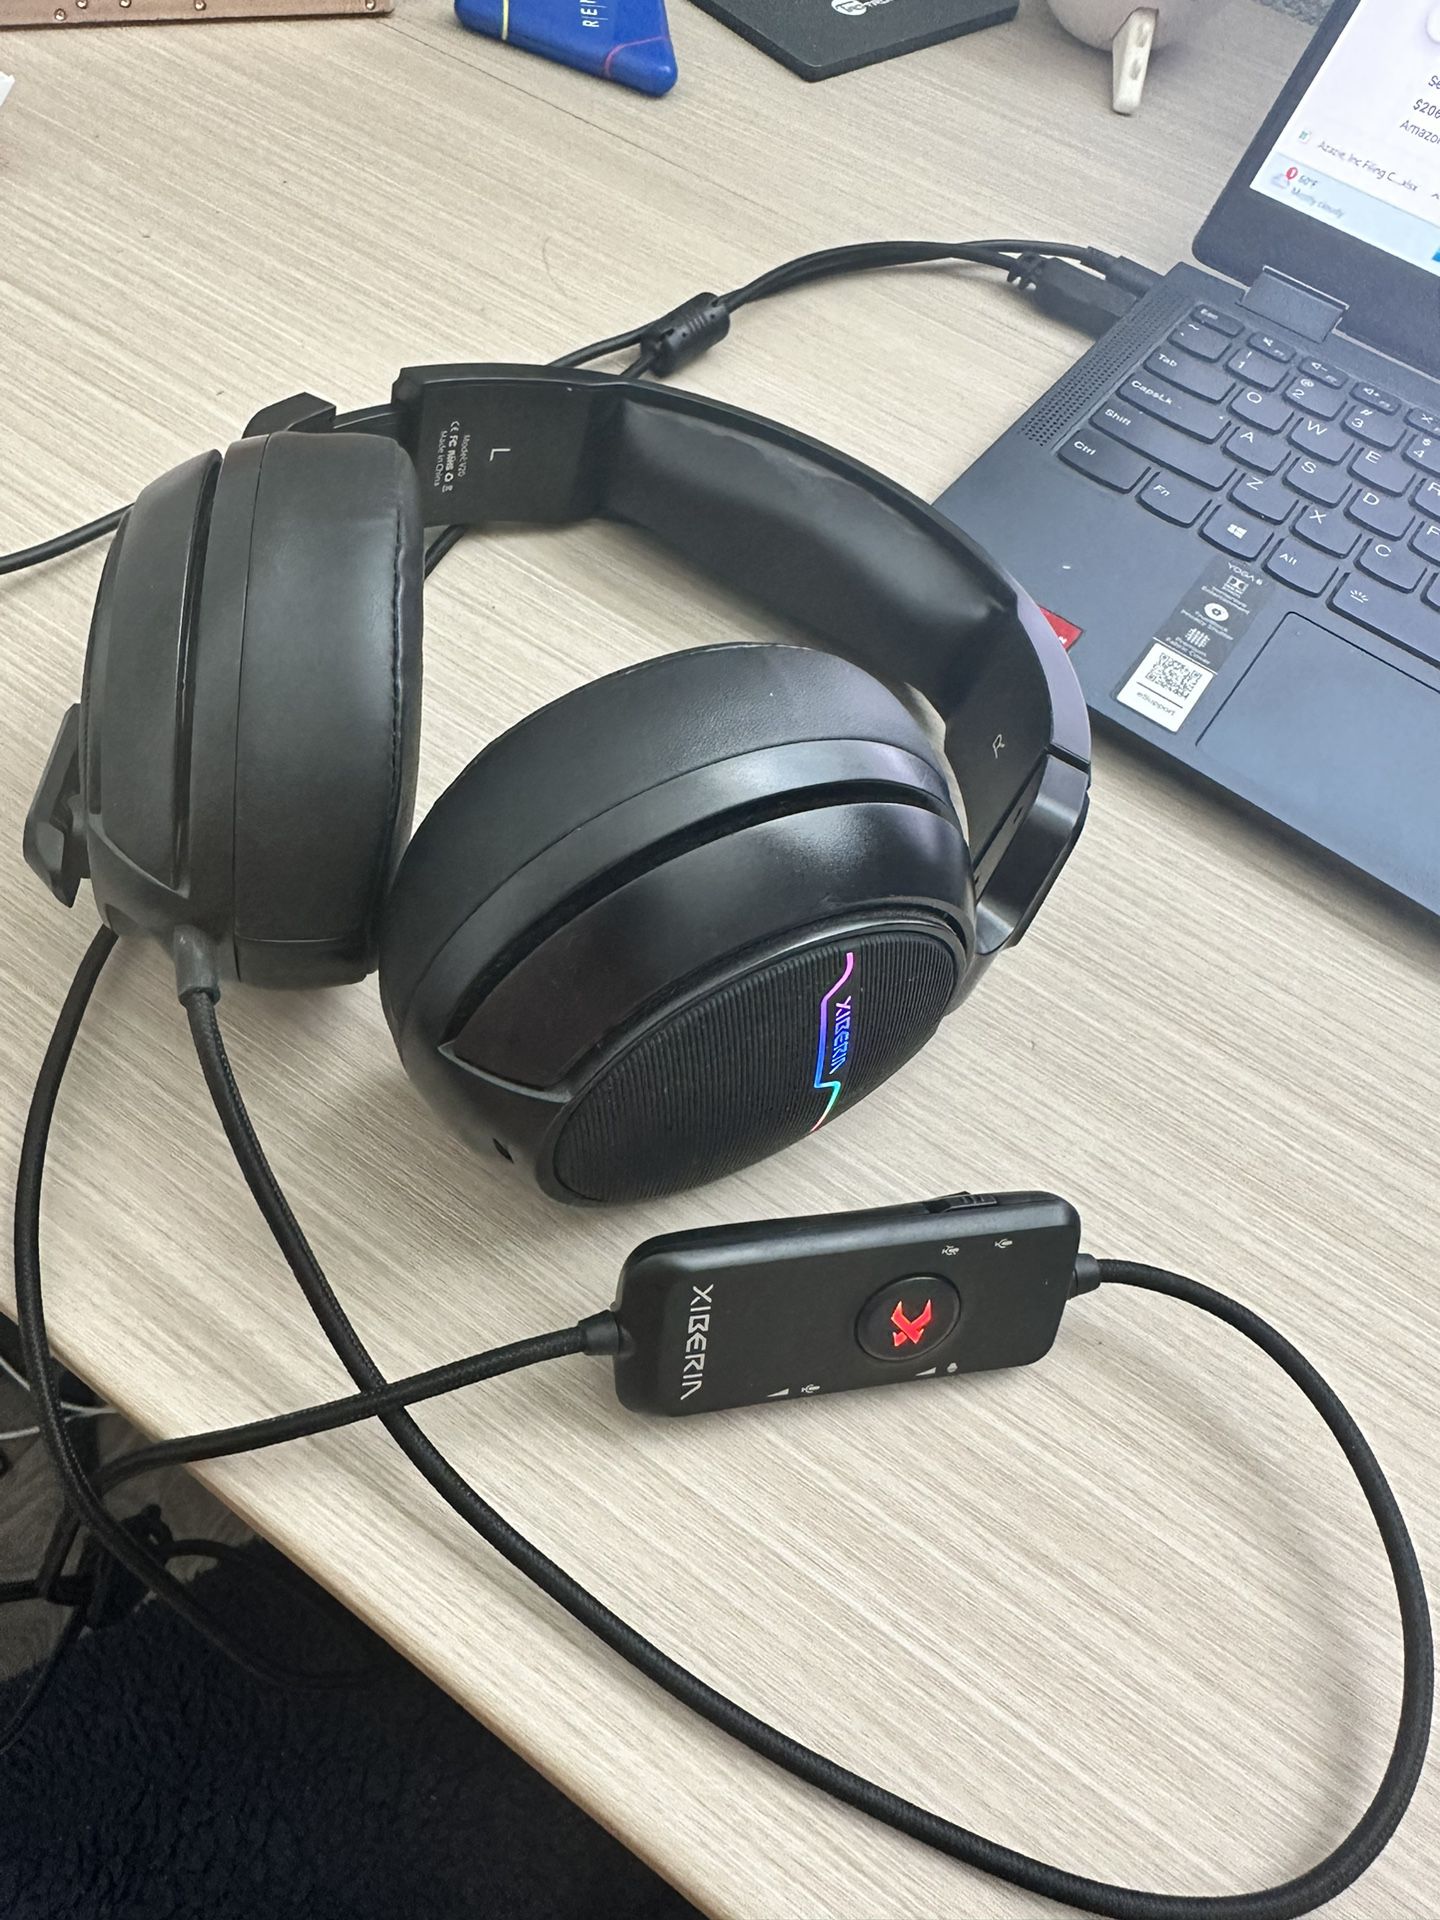 Xiberia gaming headset with usb